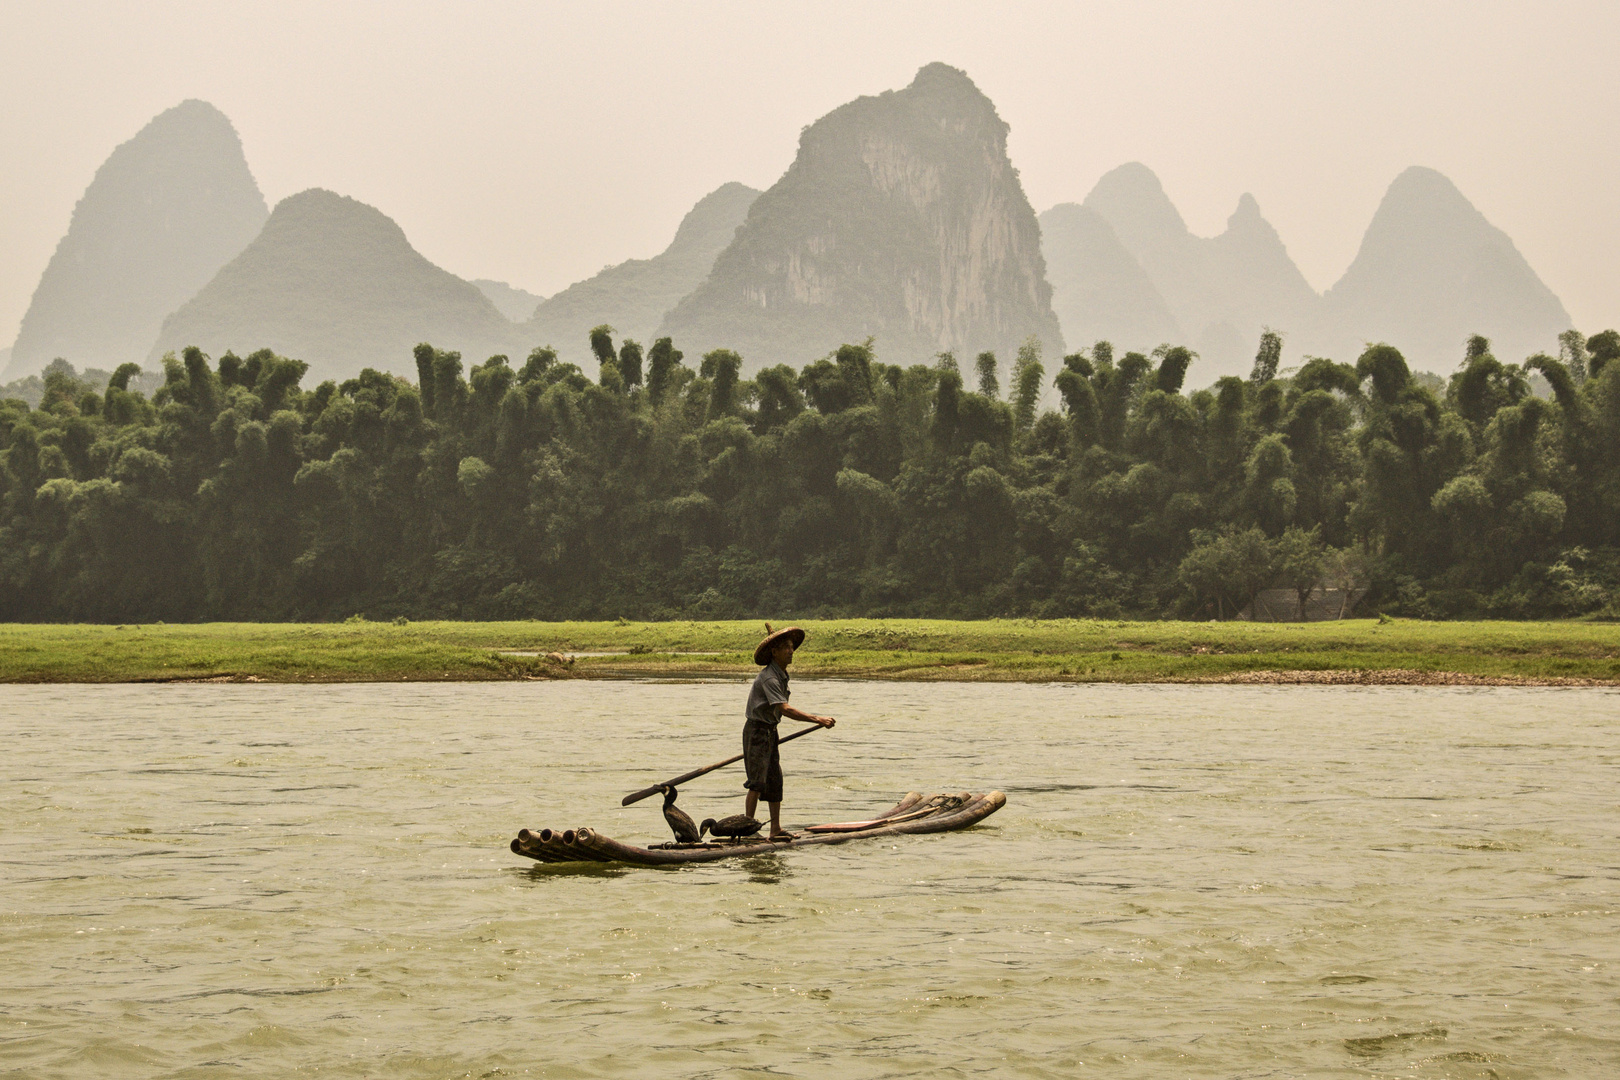 437 - Yangshuo - Fisherman on Bamboo Raft with his Cormorant. On Background the Karst Peaks